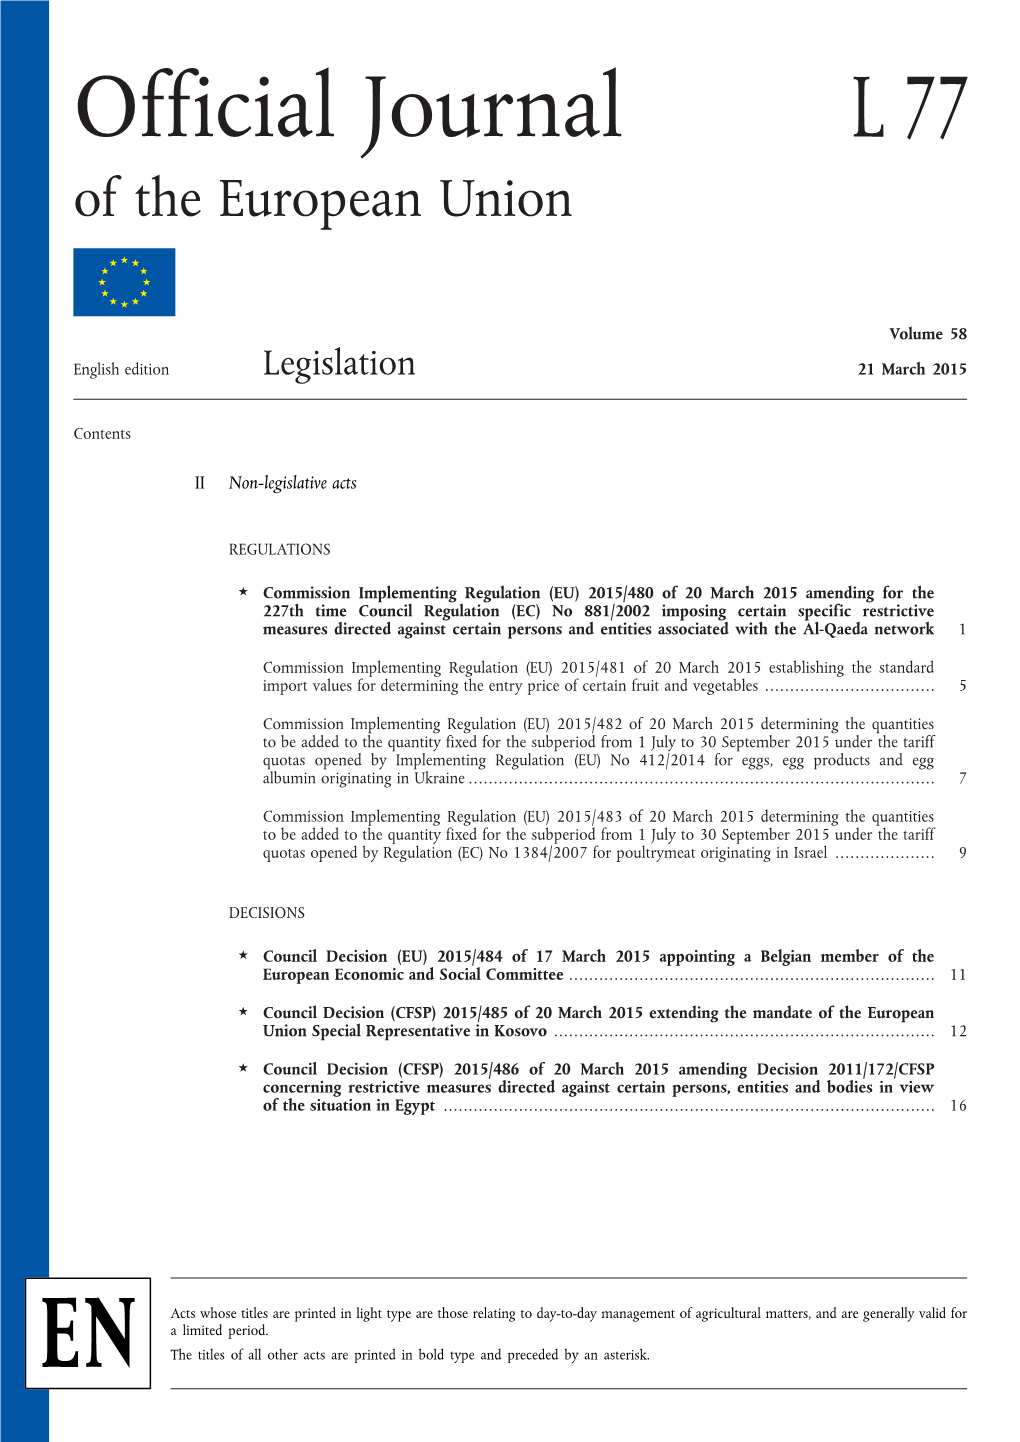 Official Journal L 77 of the European Union